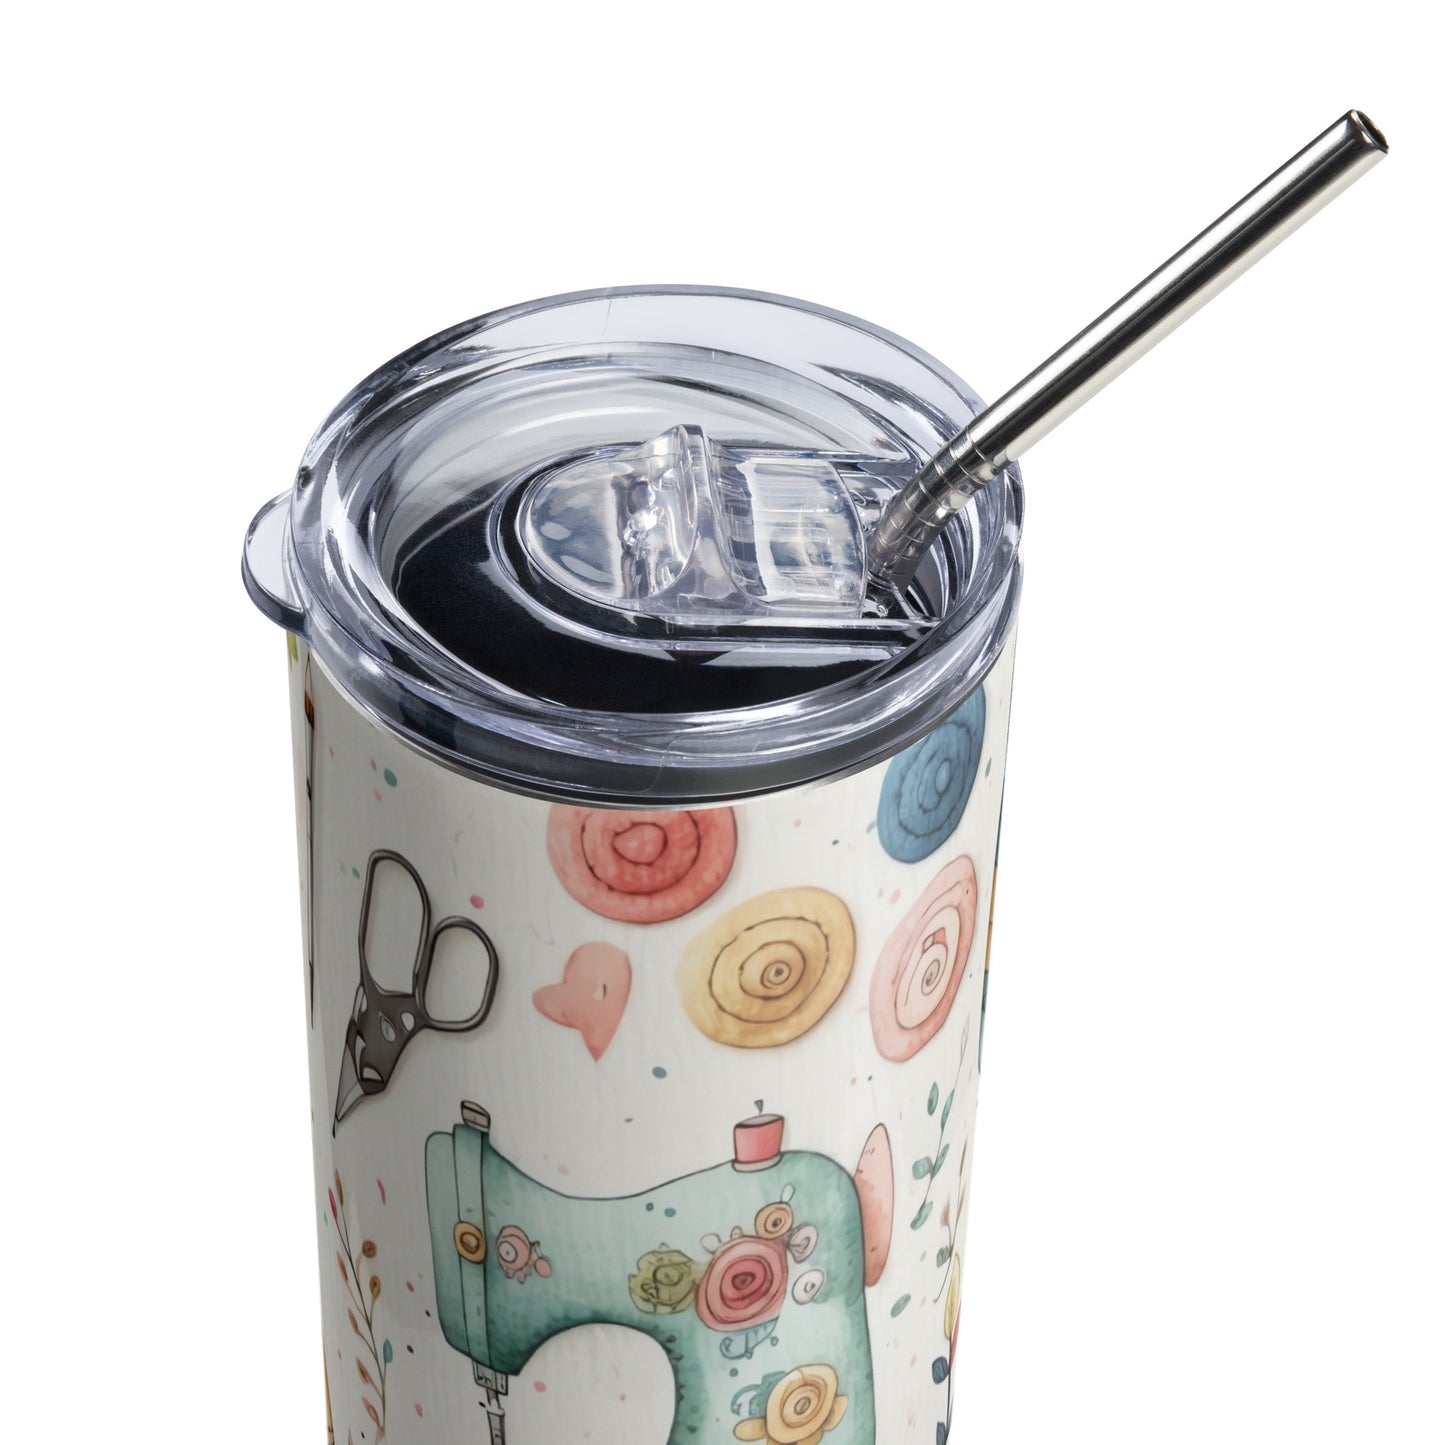 Sewing Life and Love of Sewing Stainless steel tumbler CedarHill Country Market